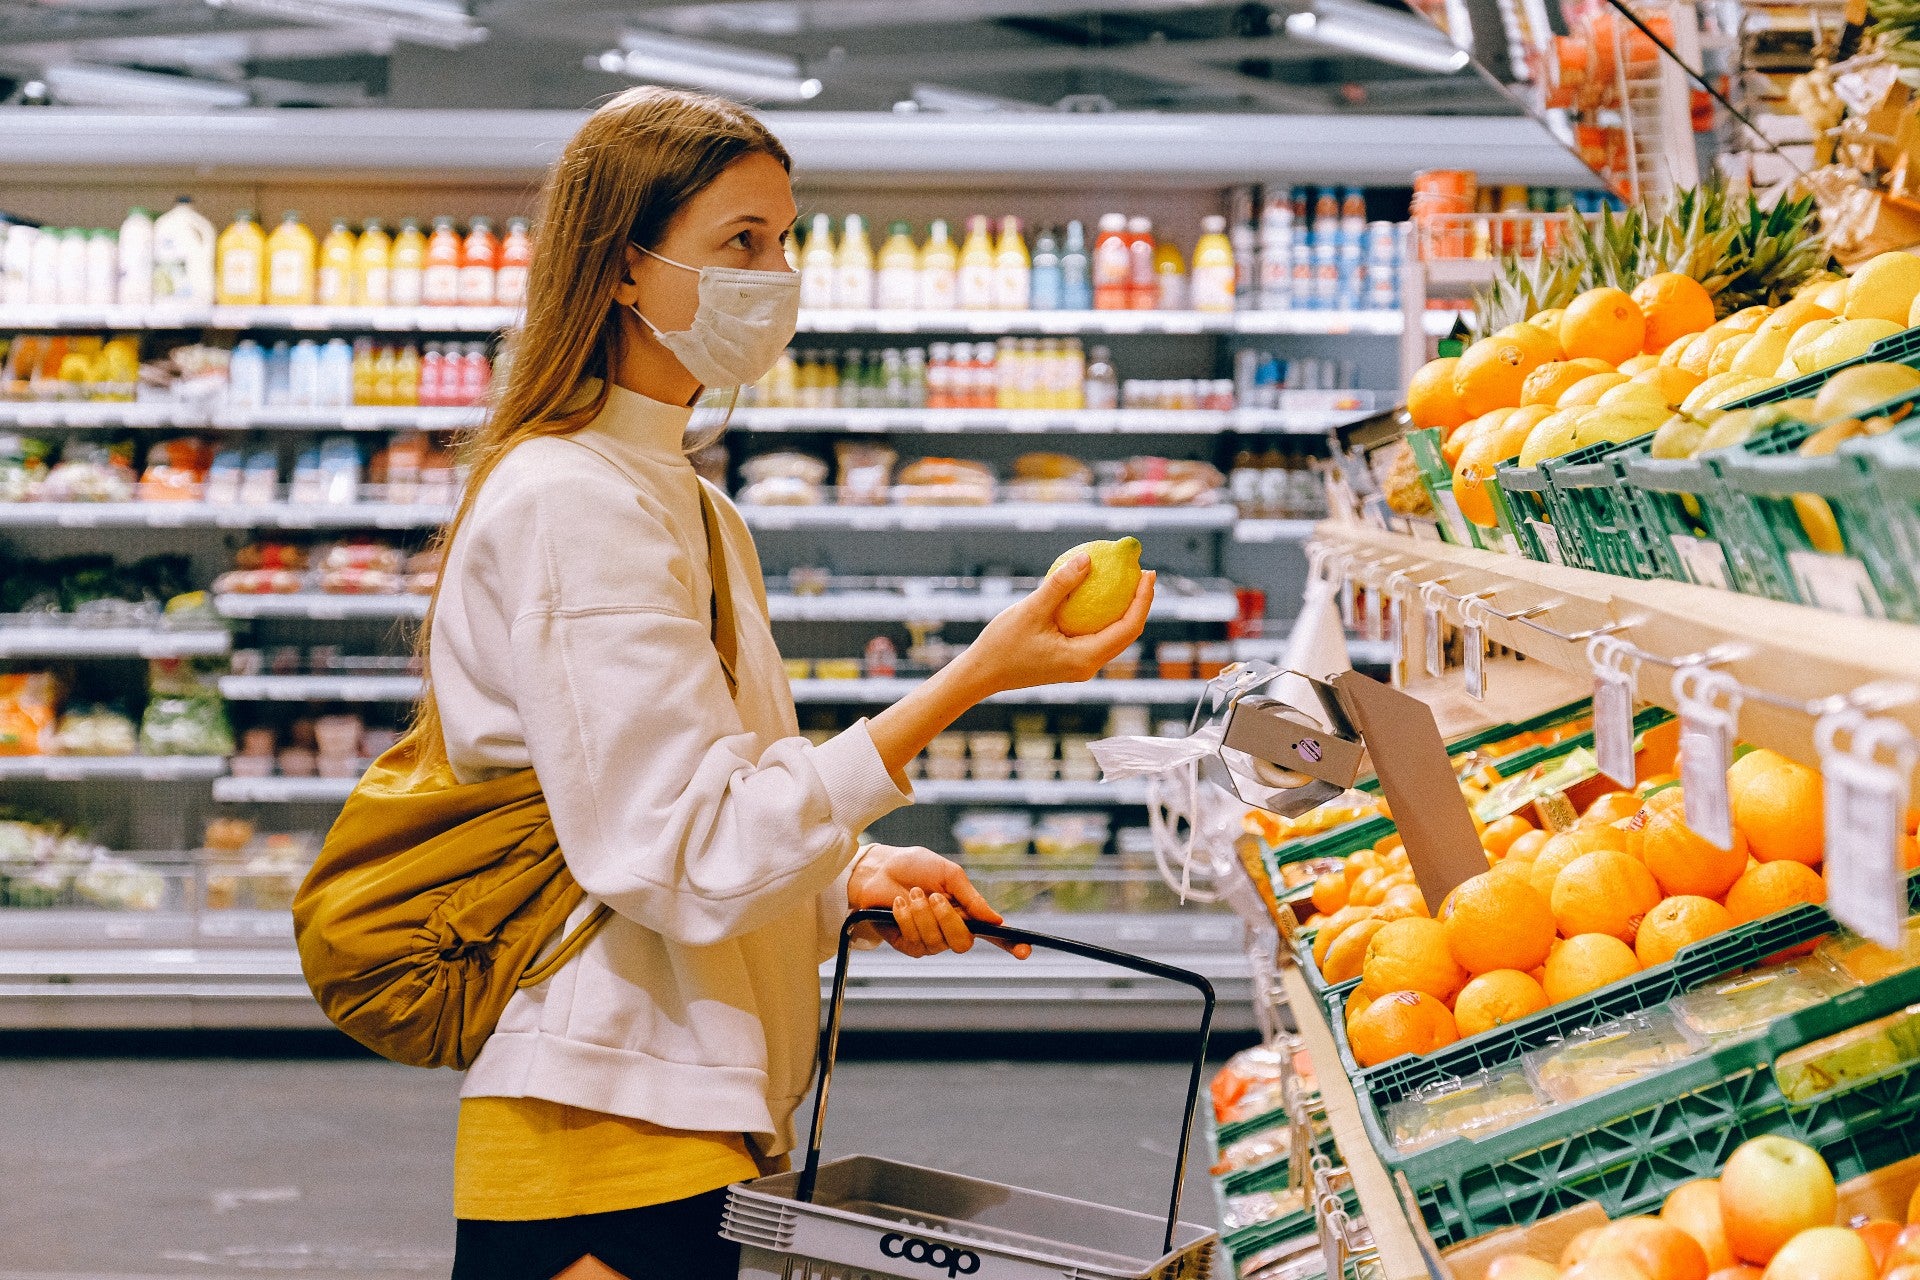 A young white woman wearing a white jacket and a face mask holds a lemon up in a grocery store.